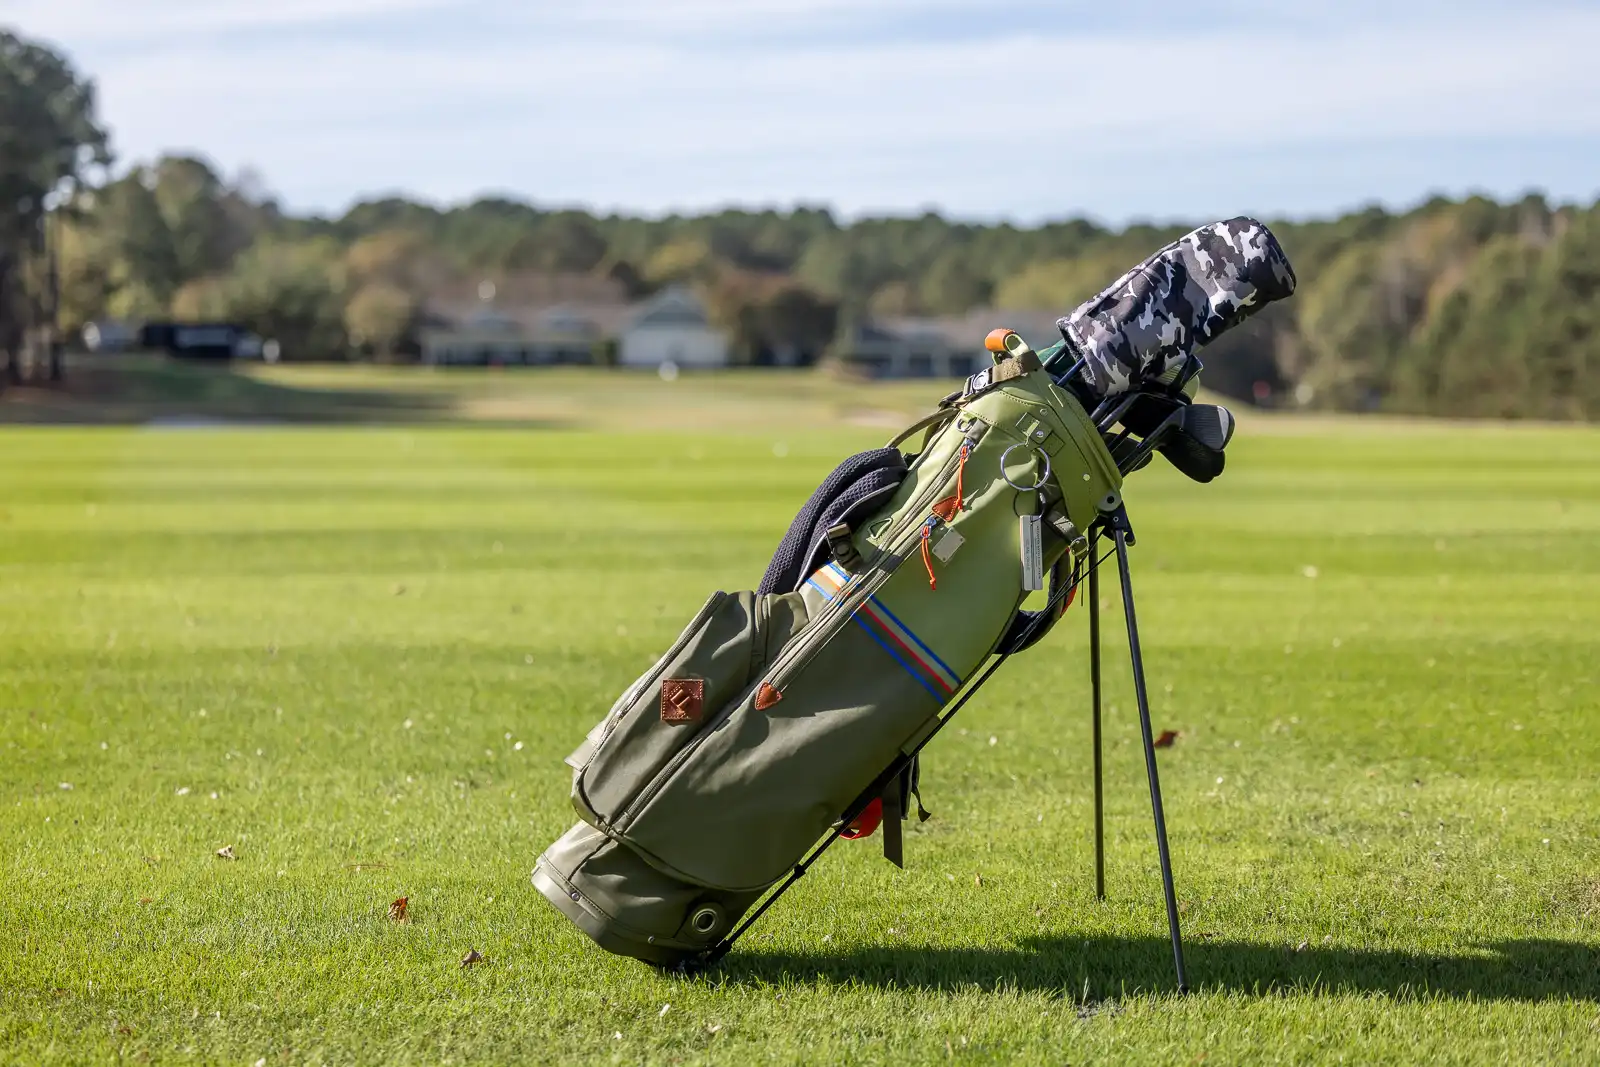 Clubs allowed in tournament golf play